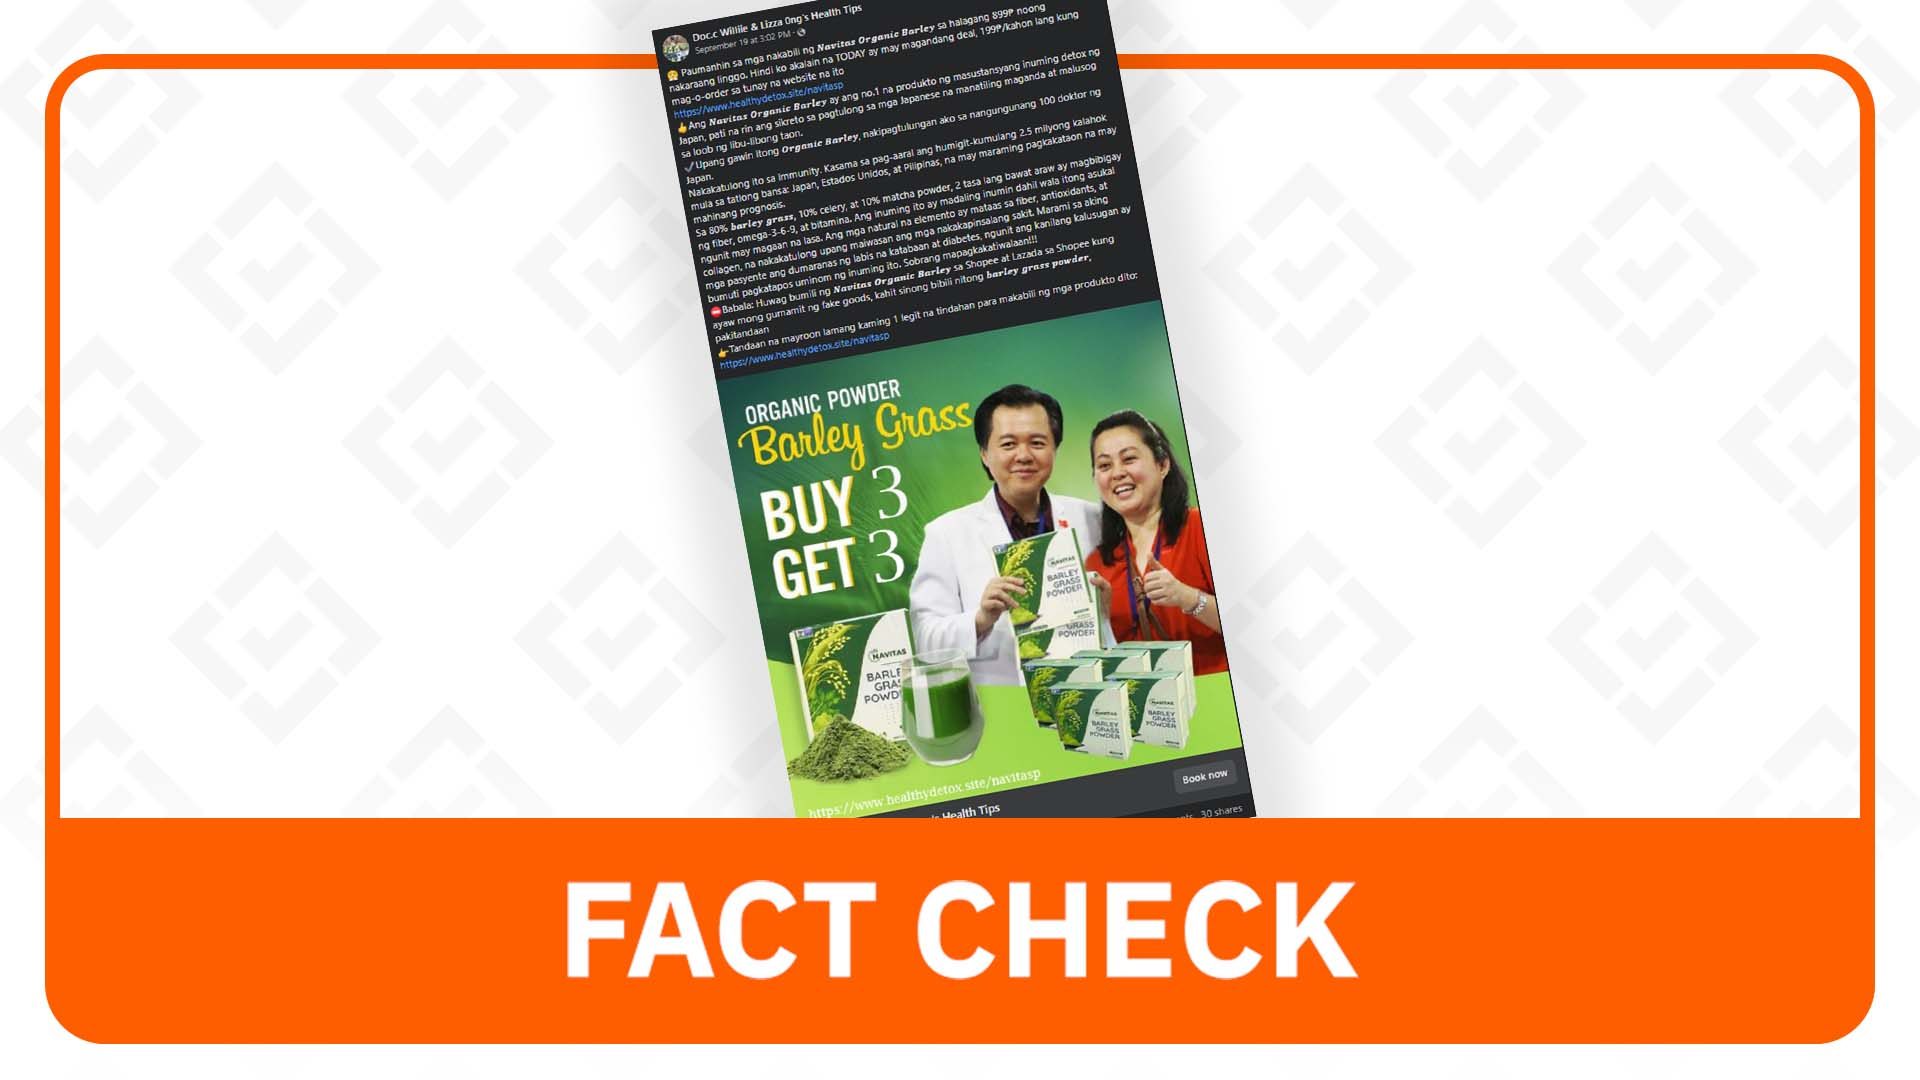 FACT CHECK: Barley Grass Powder ad uses altered photo of Doc Willie Ong